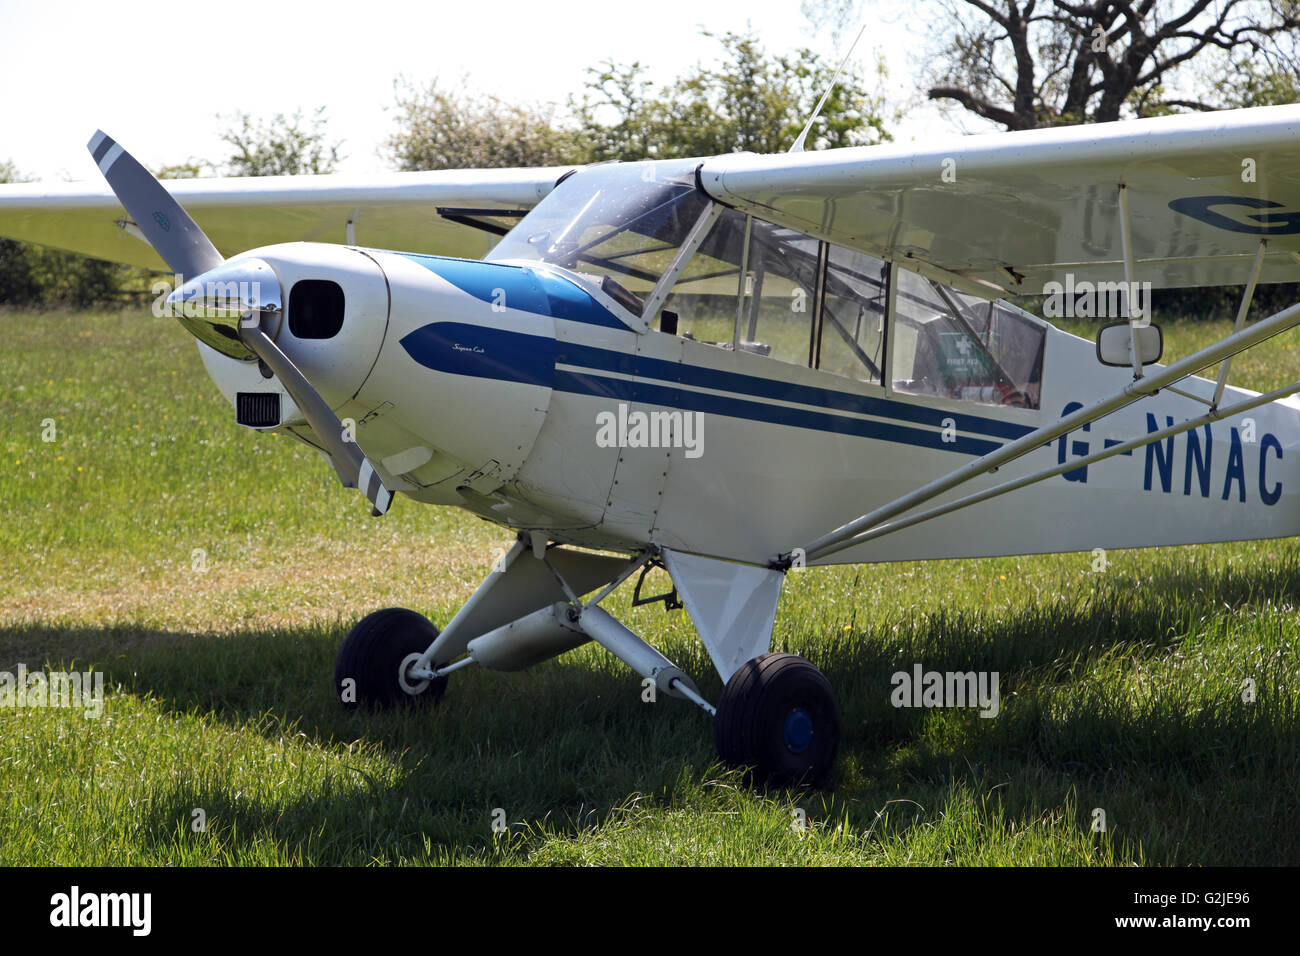 Peter Wild's Piper Super Cub PA18 light aircraft at an airfield in Yorkshire, UK Stock Photo